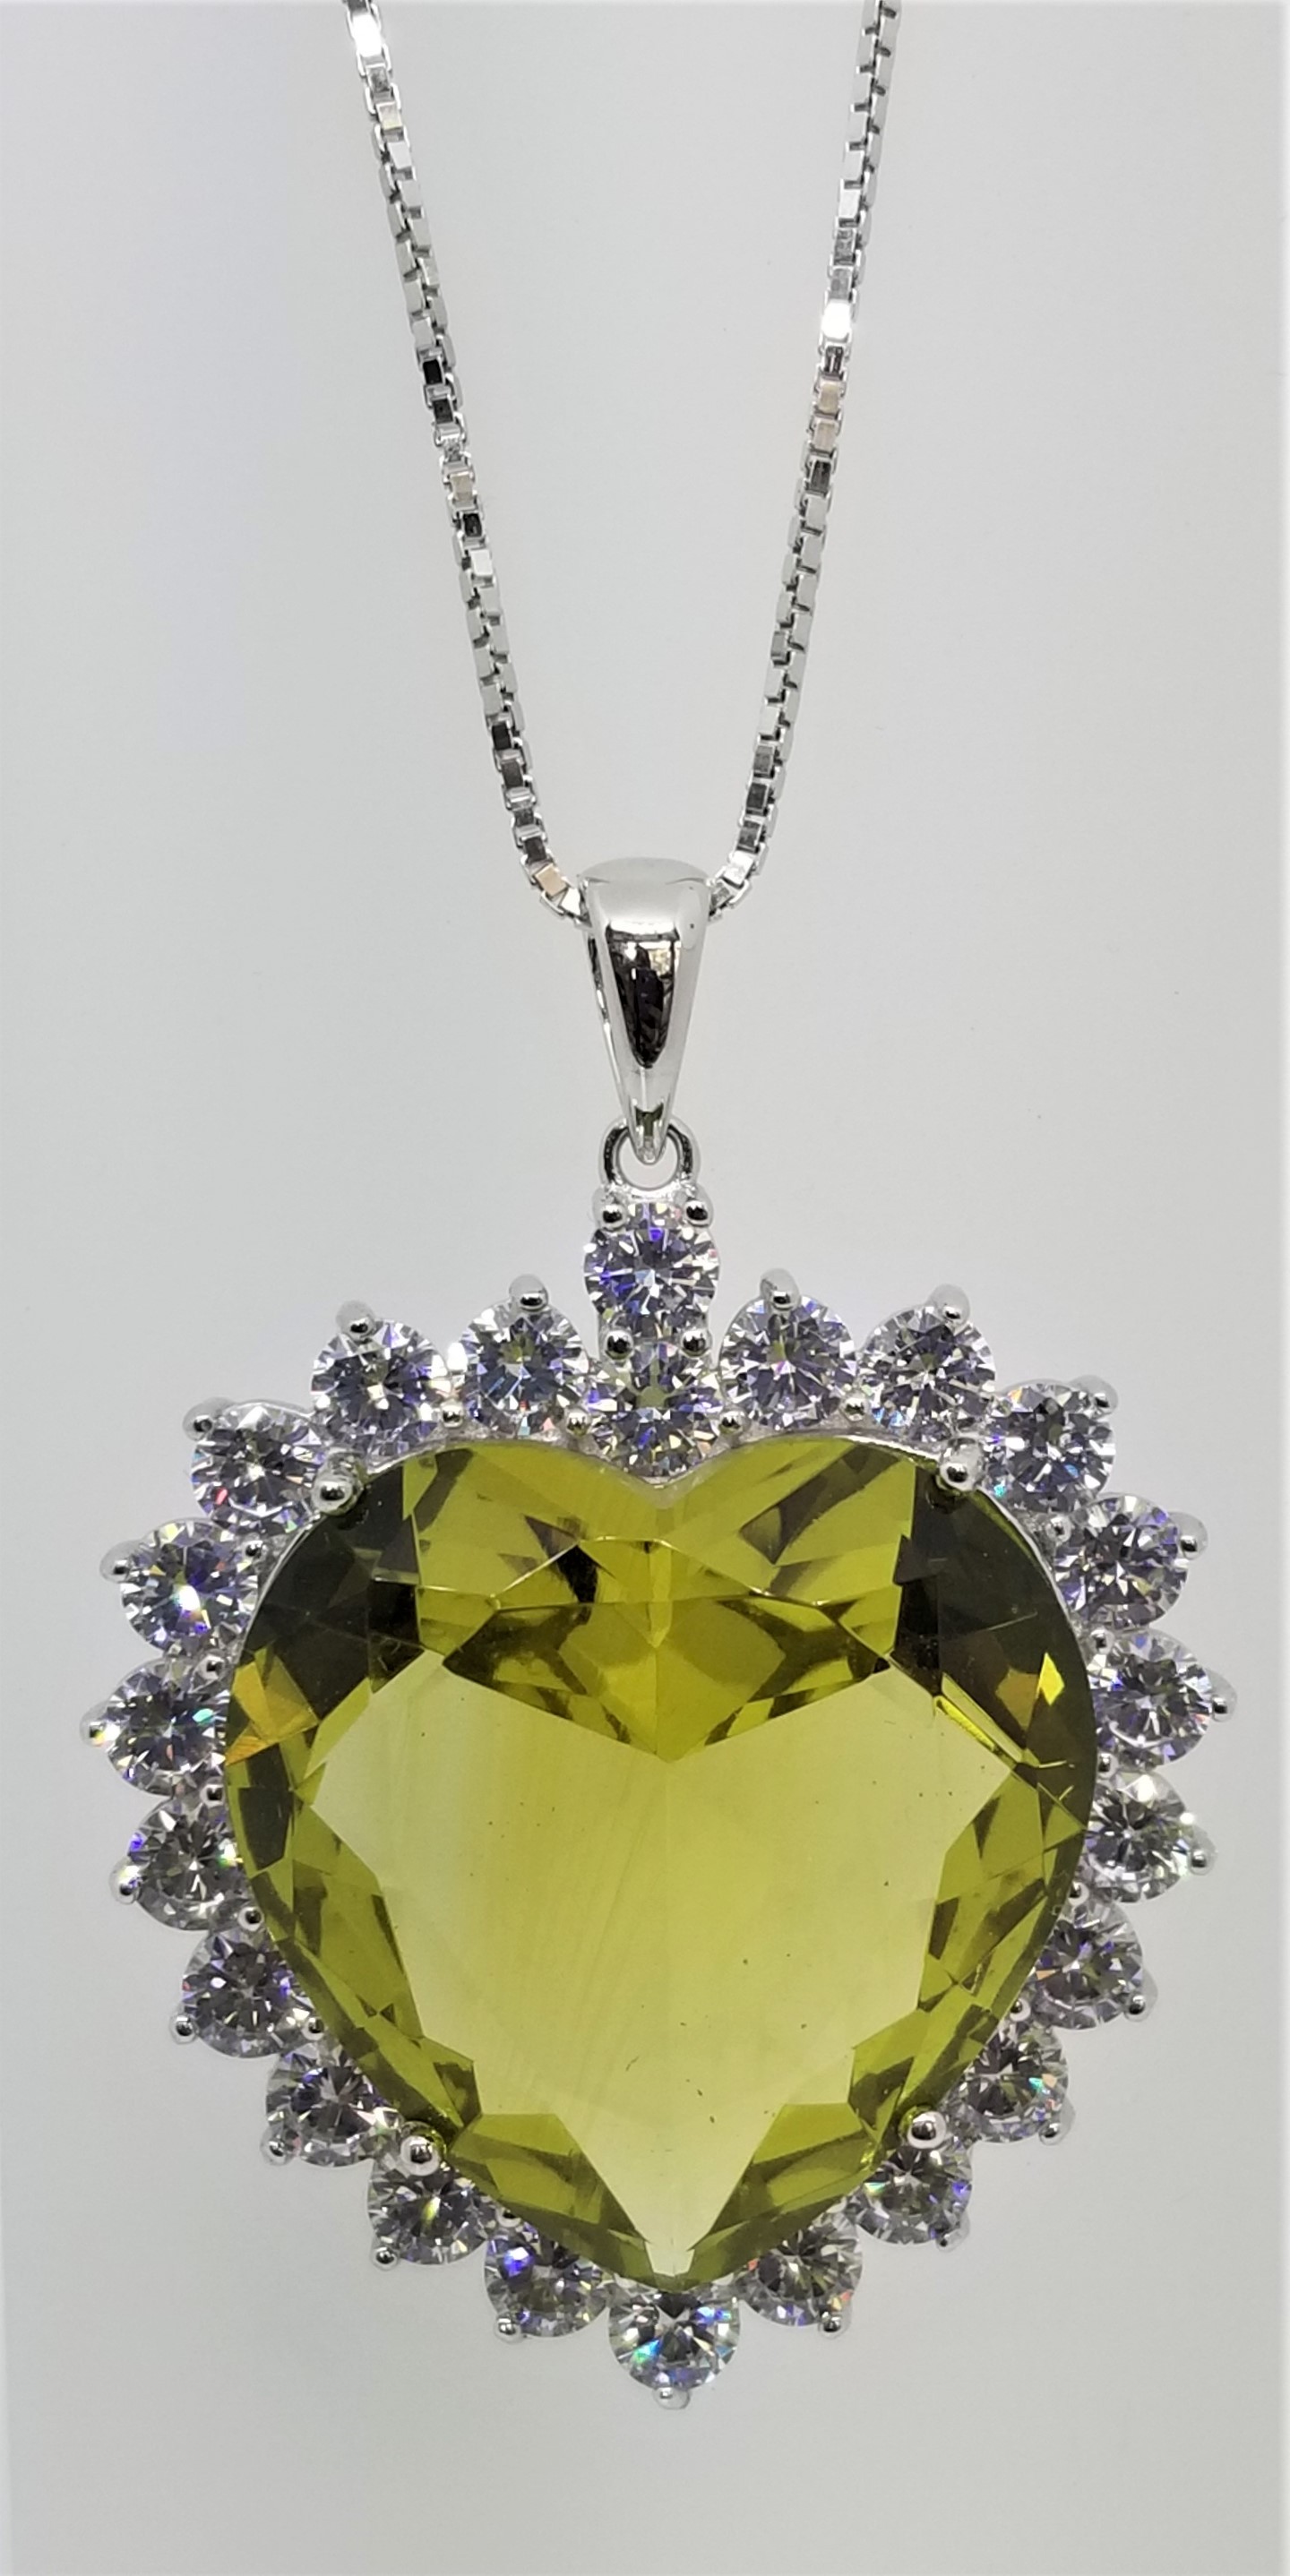 925 Sterling Silver Heart Pendant With Lime Green Topaz And CZ